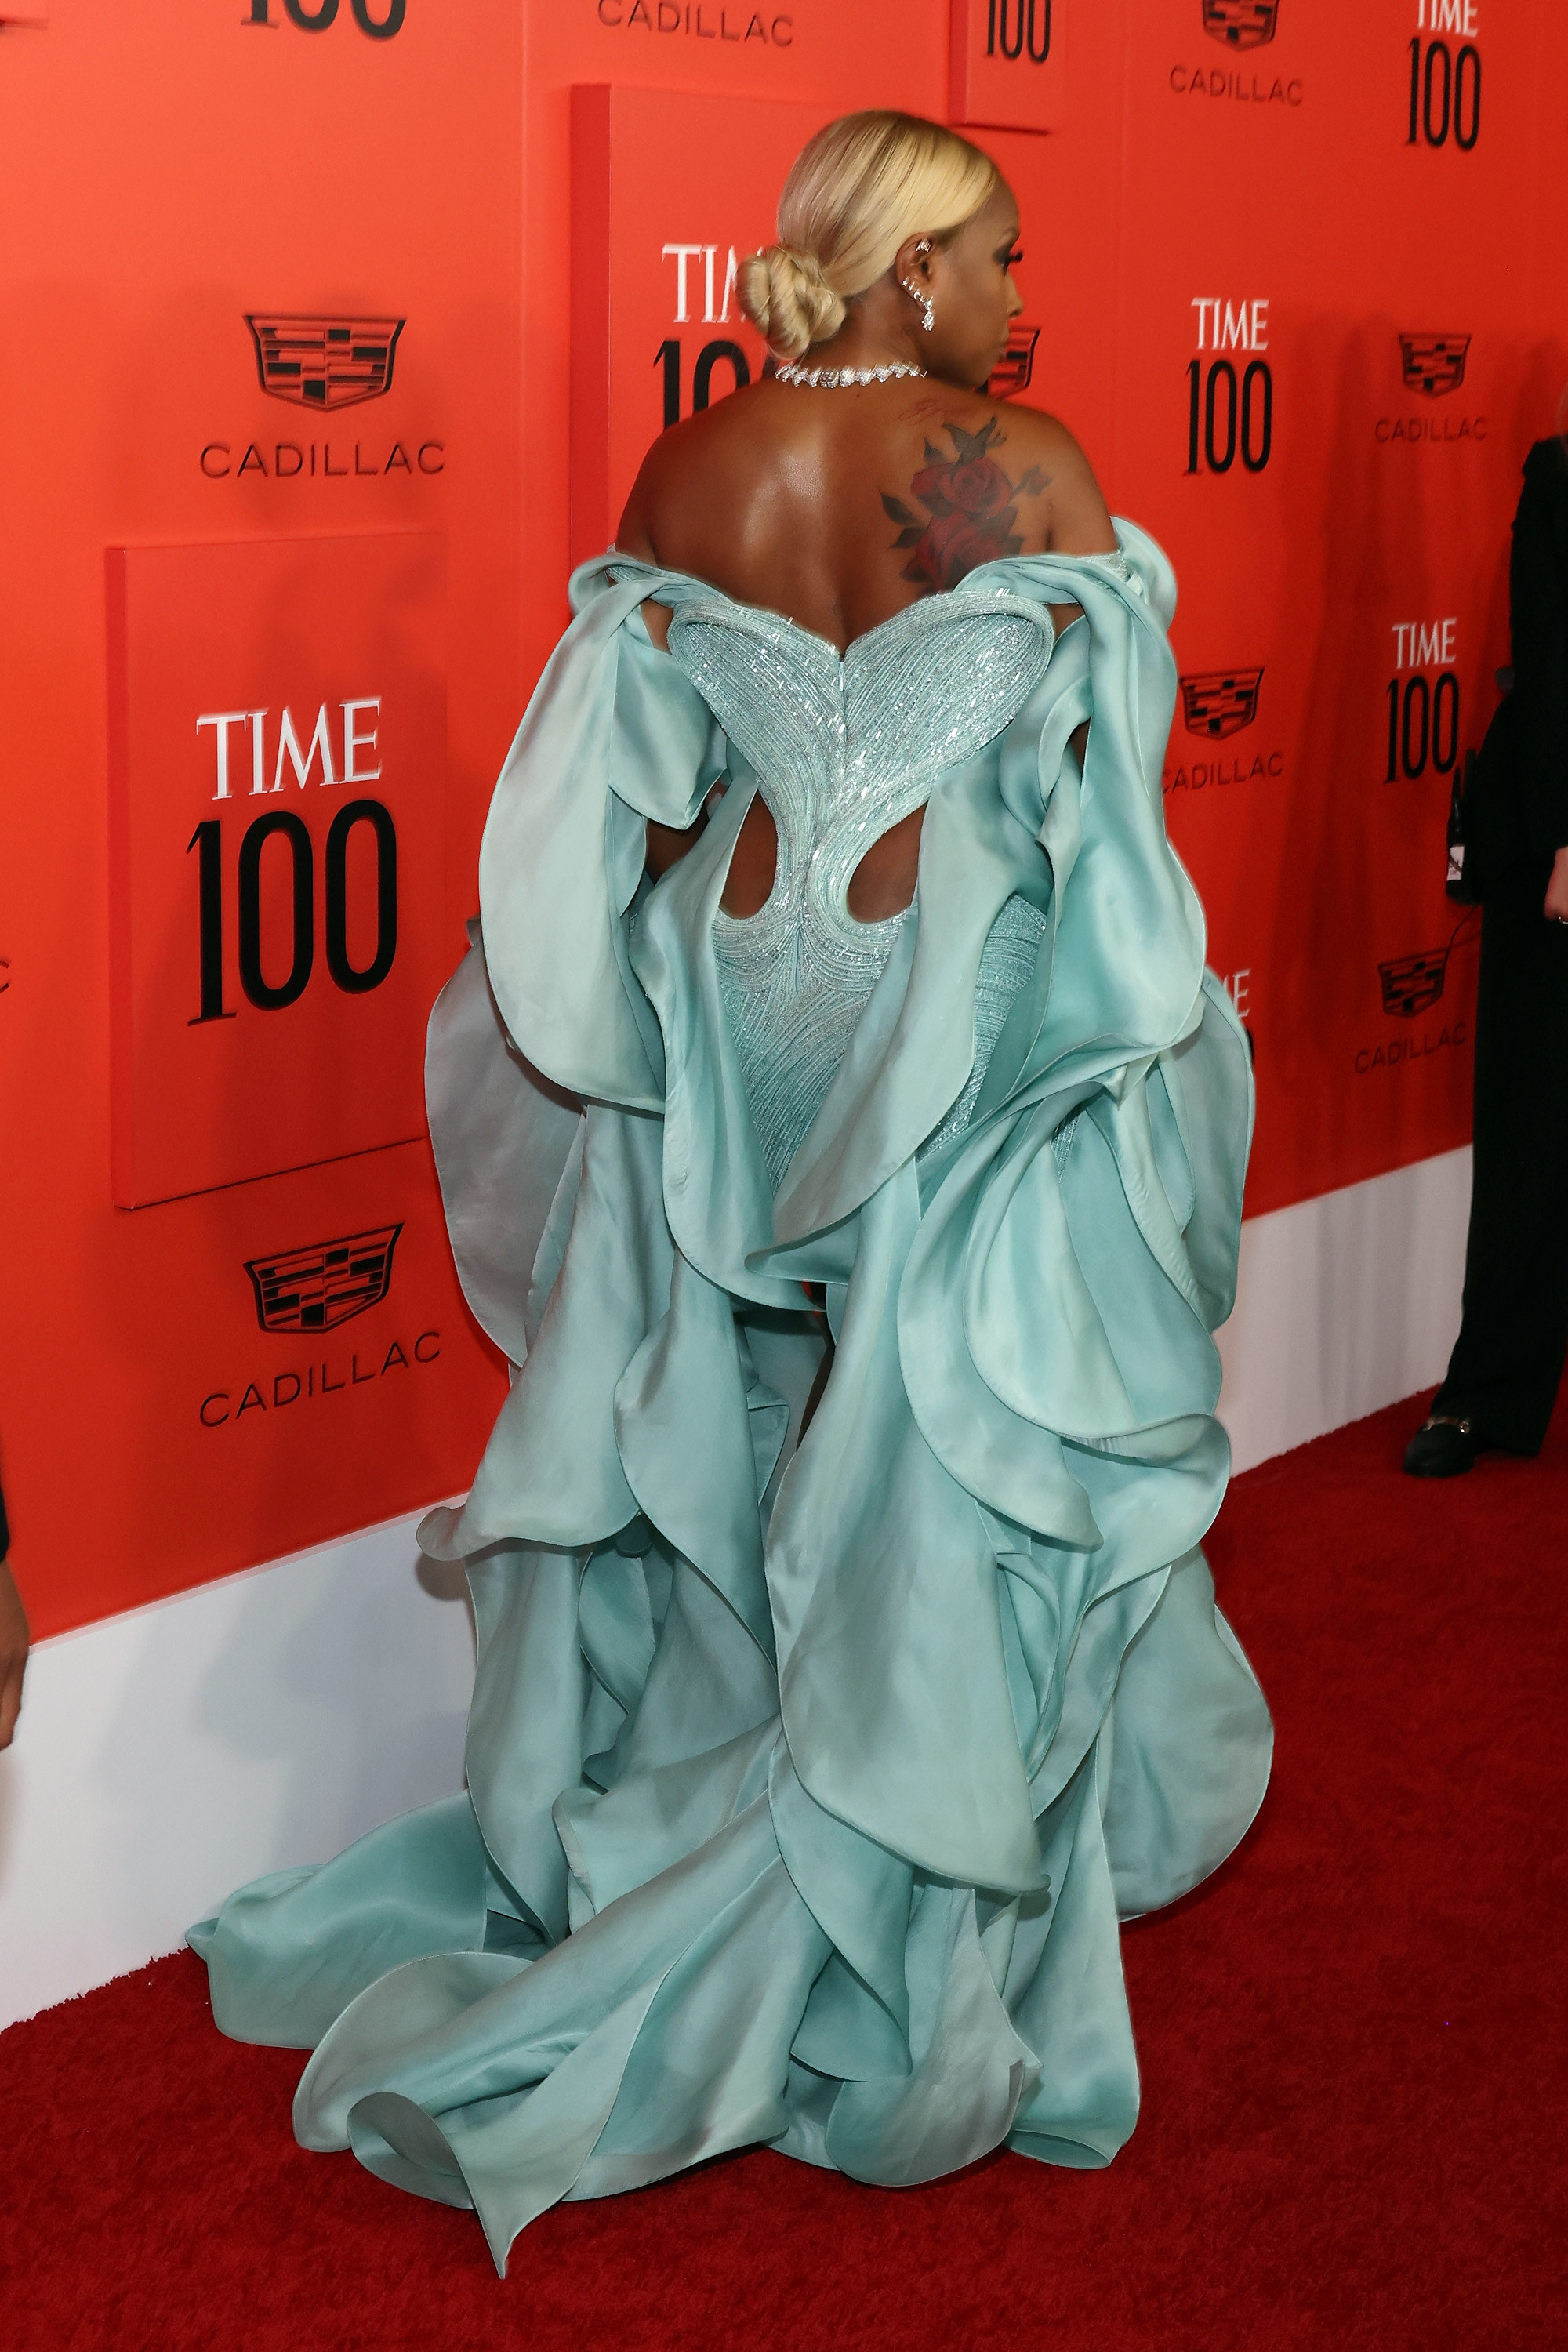 A view of Mary J. Blige&#x27;s dress from the back. The dress has cutouts on her lower back